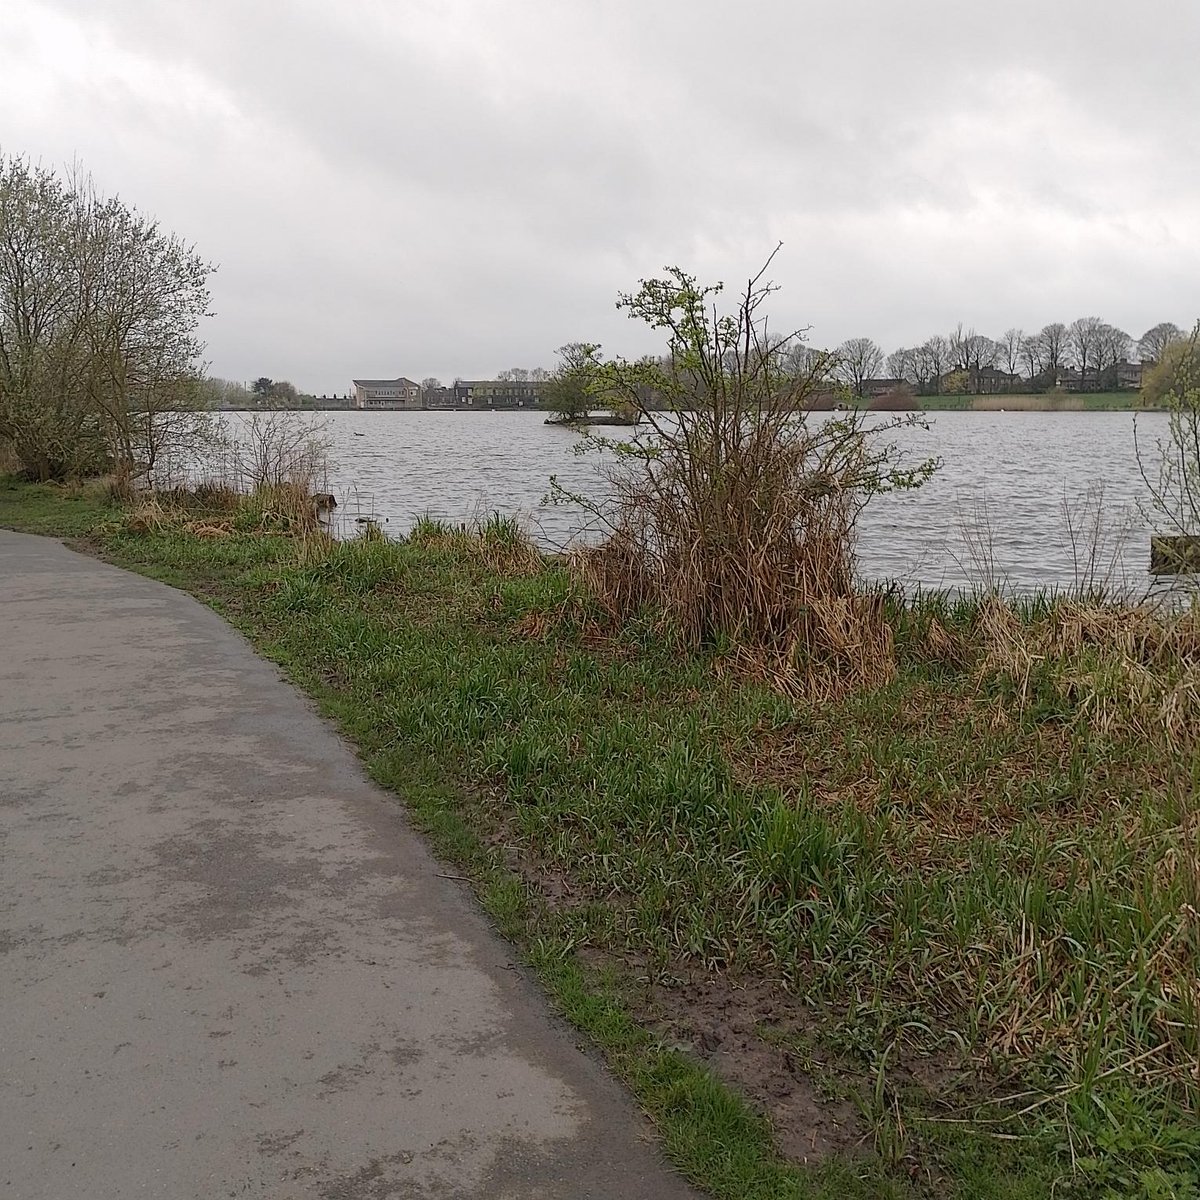 Joe had a walk around Yeadon Tarn with Chris and Jason where they saw some swans and geese resting on the waterside. Thankfully, they made it back to Mabgate before the downpour, for a lunch of homemade sausage and chips 🚶‍♂️🏞️🌭🍟#autism #inclusion #daysout